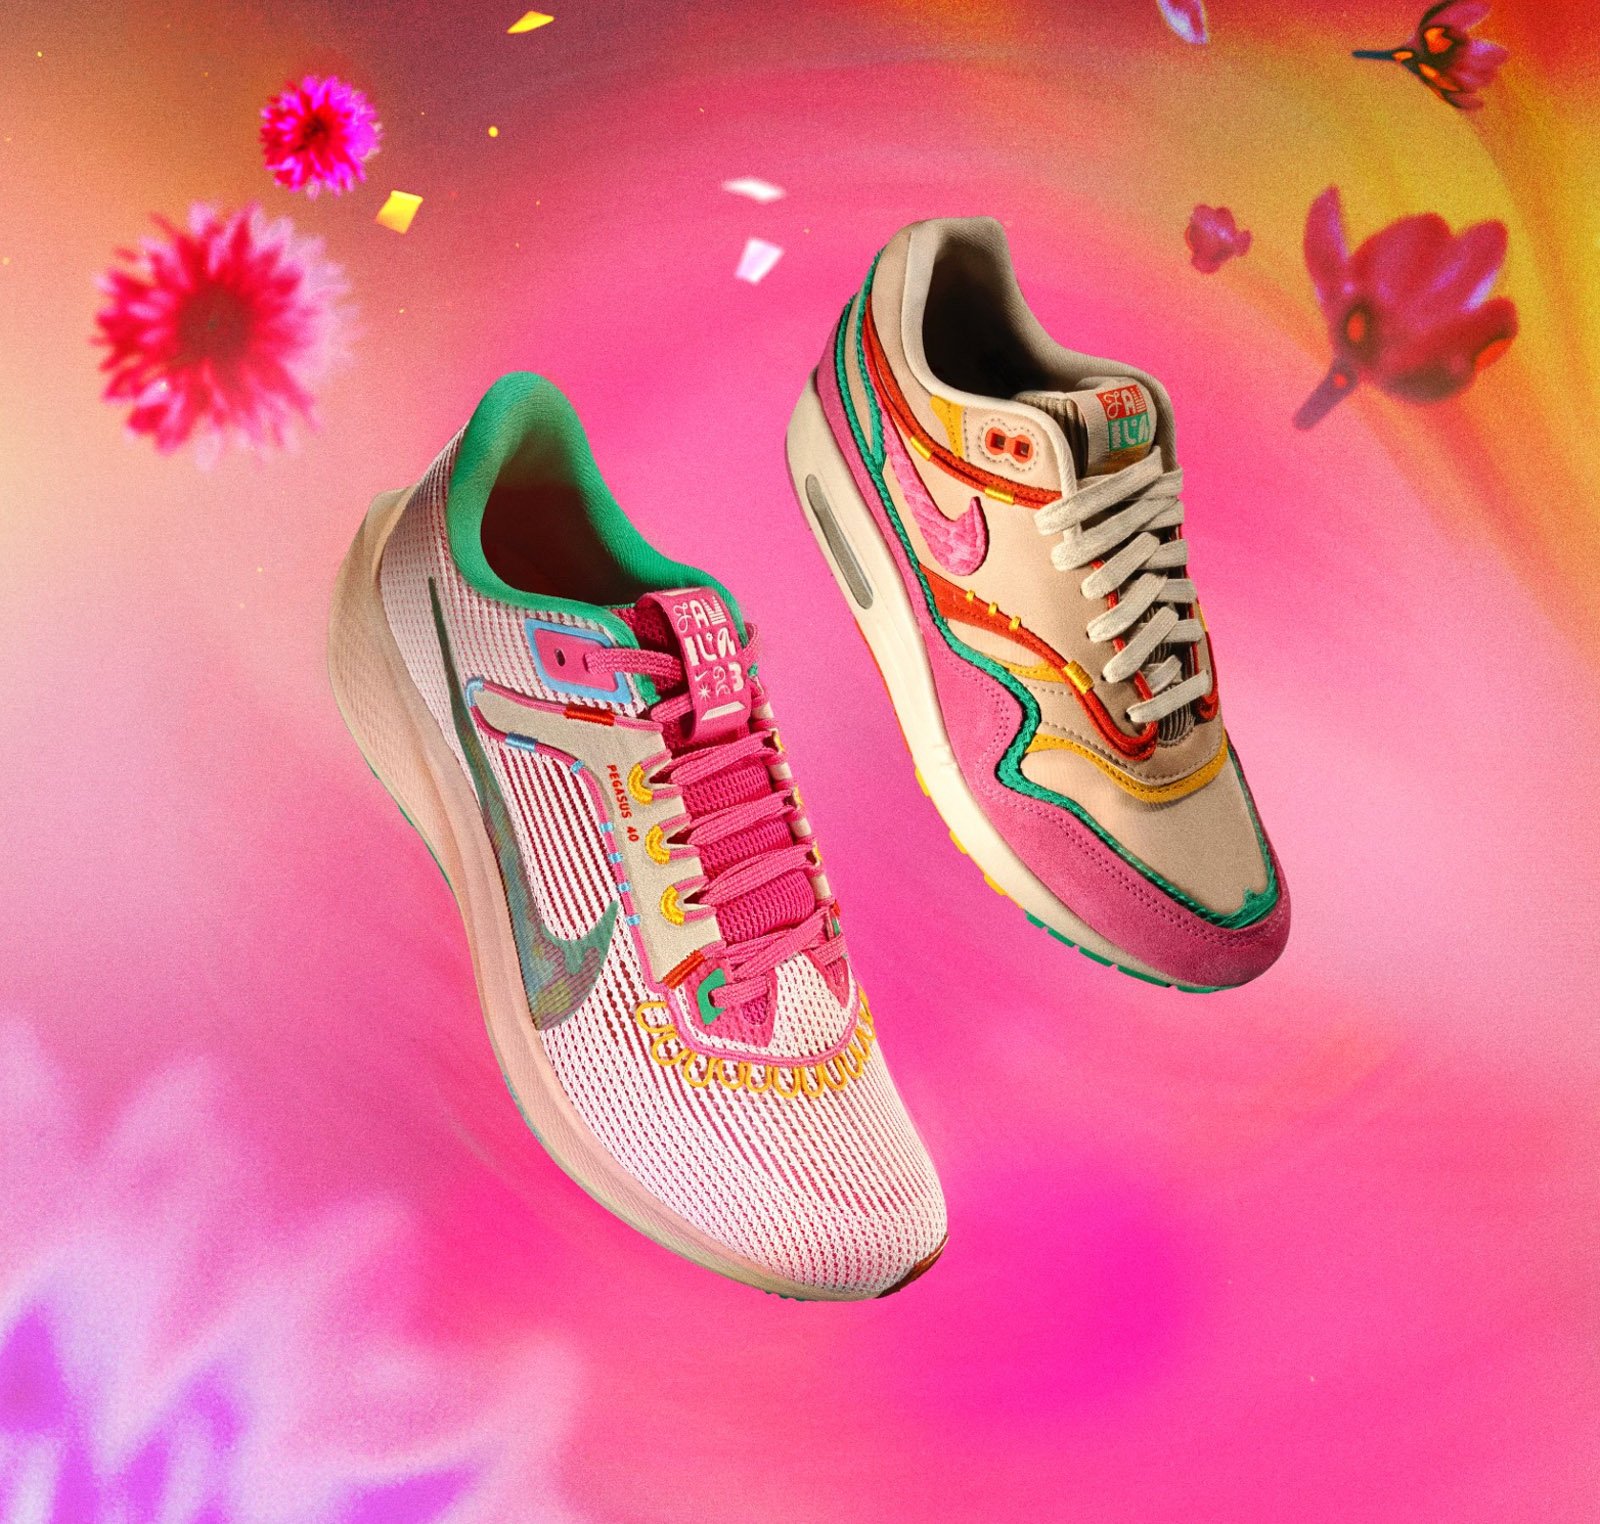 A pair of shoes with bright pink, purple, and yellow colors float amid a flowery background.